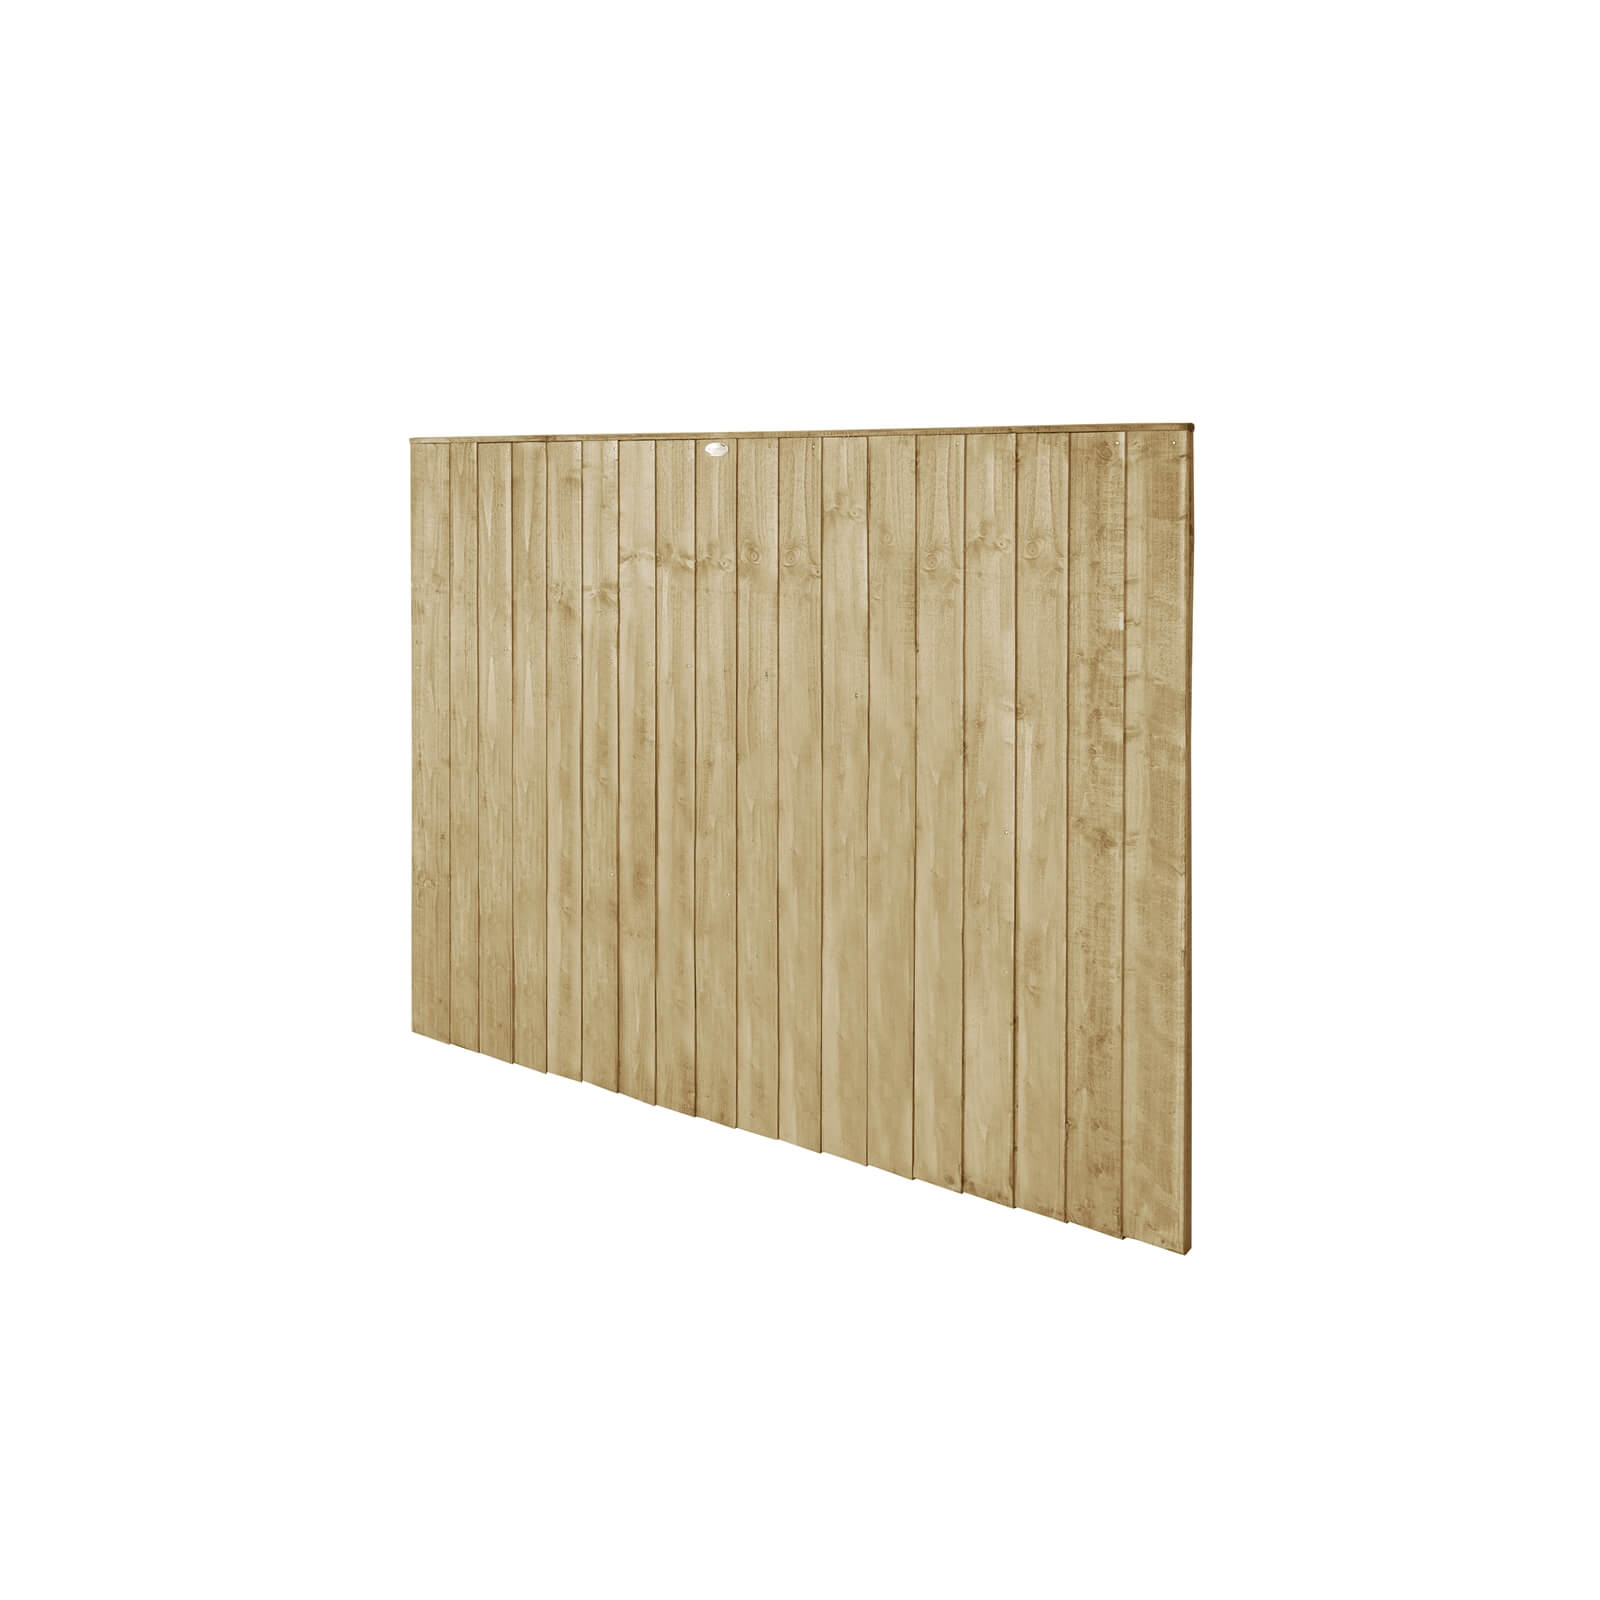 6ft x 5ft (1.83m x 1.54m) Pressure Treated Featheredge Fence Panel - Pack of 3